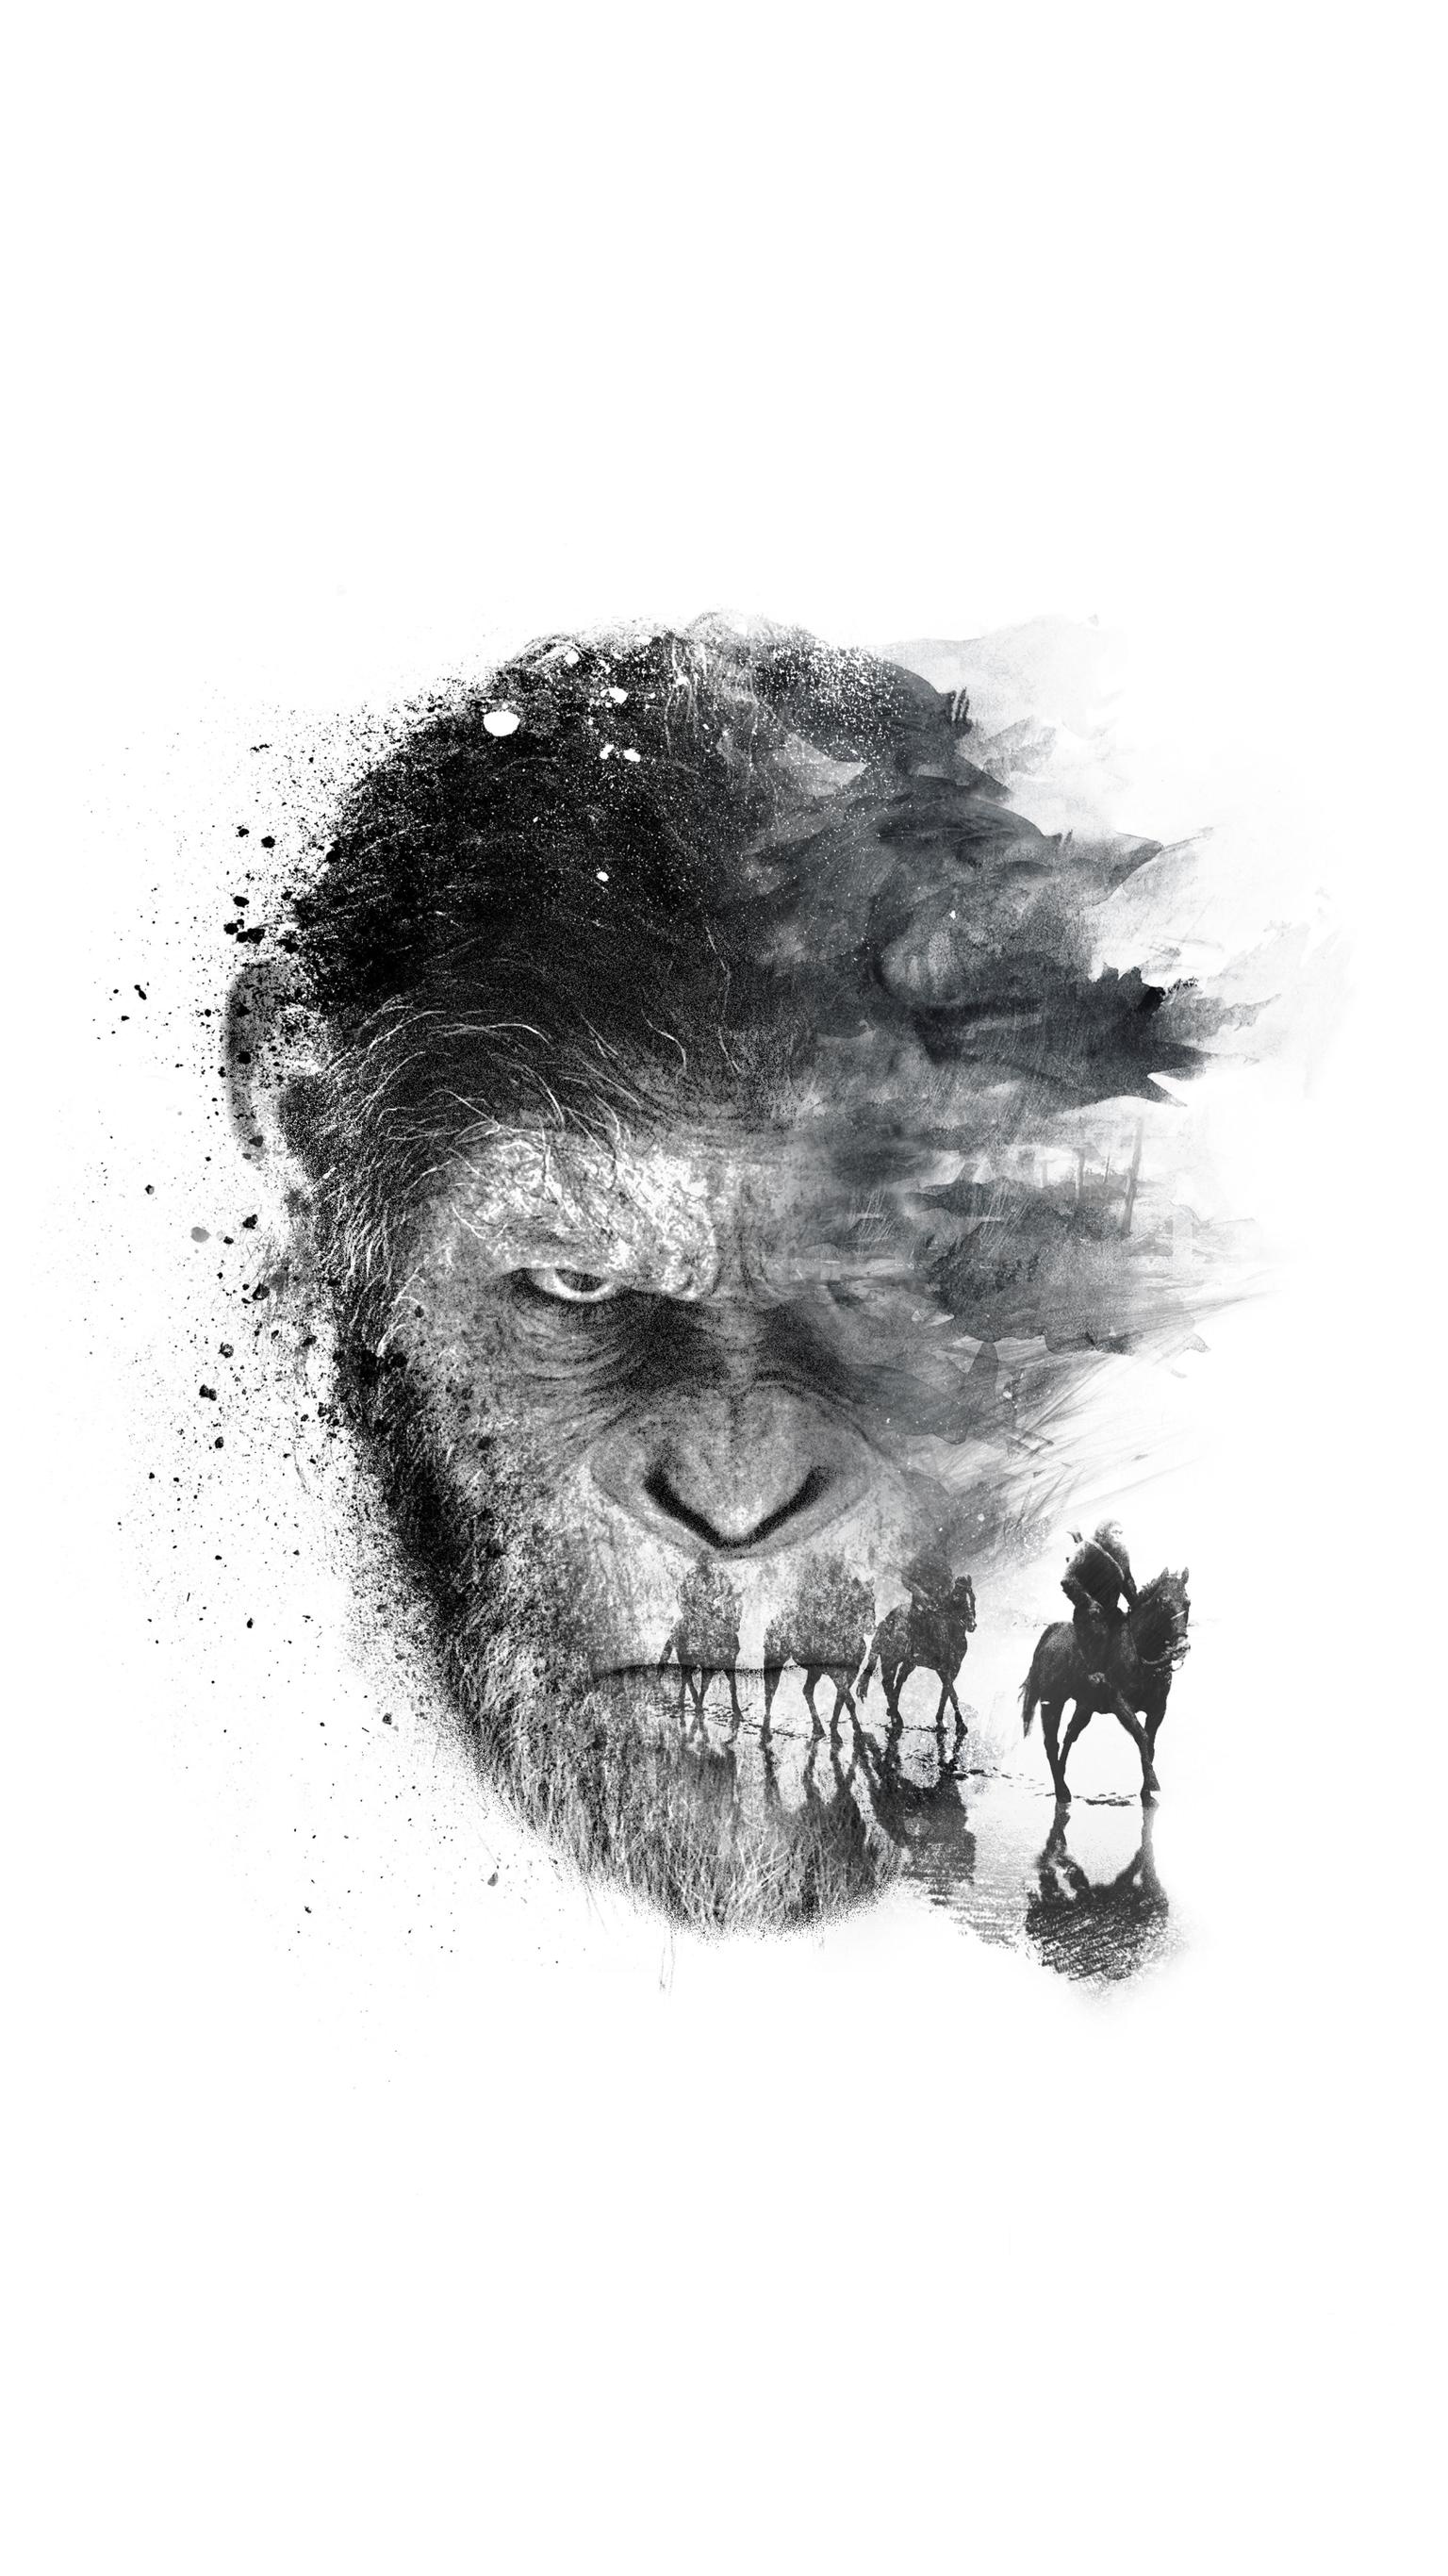 Planet of the Apes, Breathtaking wallpapers, Apes in action, Stunning visuals, 1540x2740 HD Phone